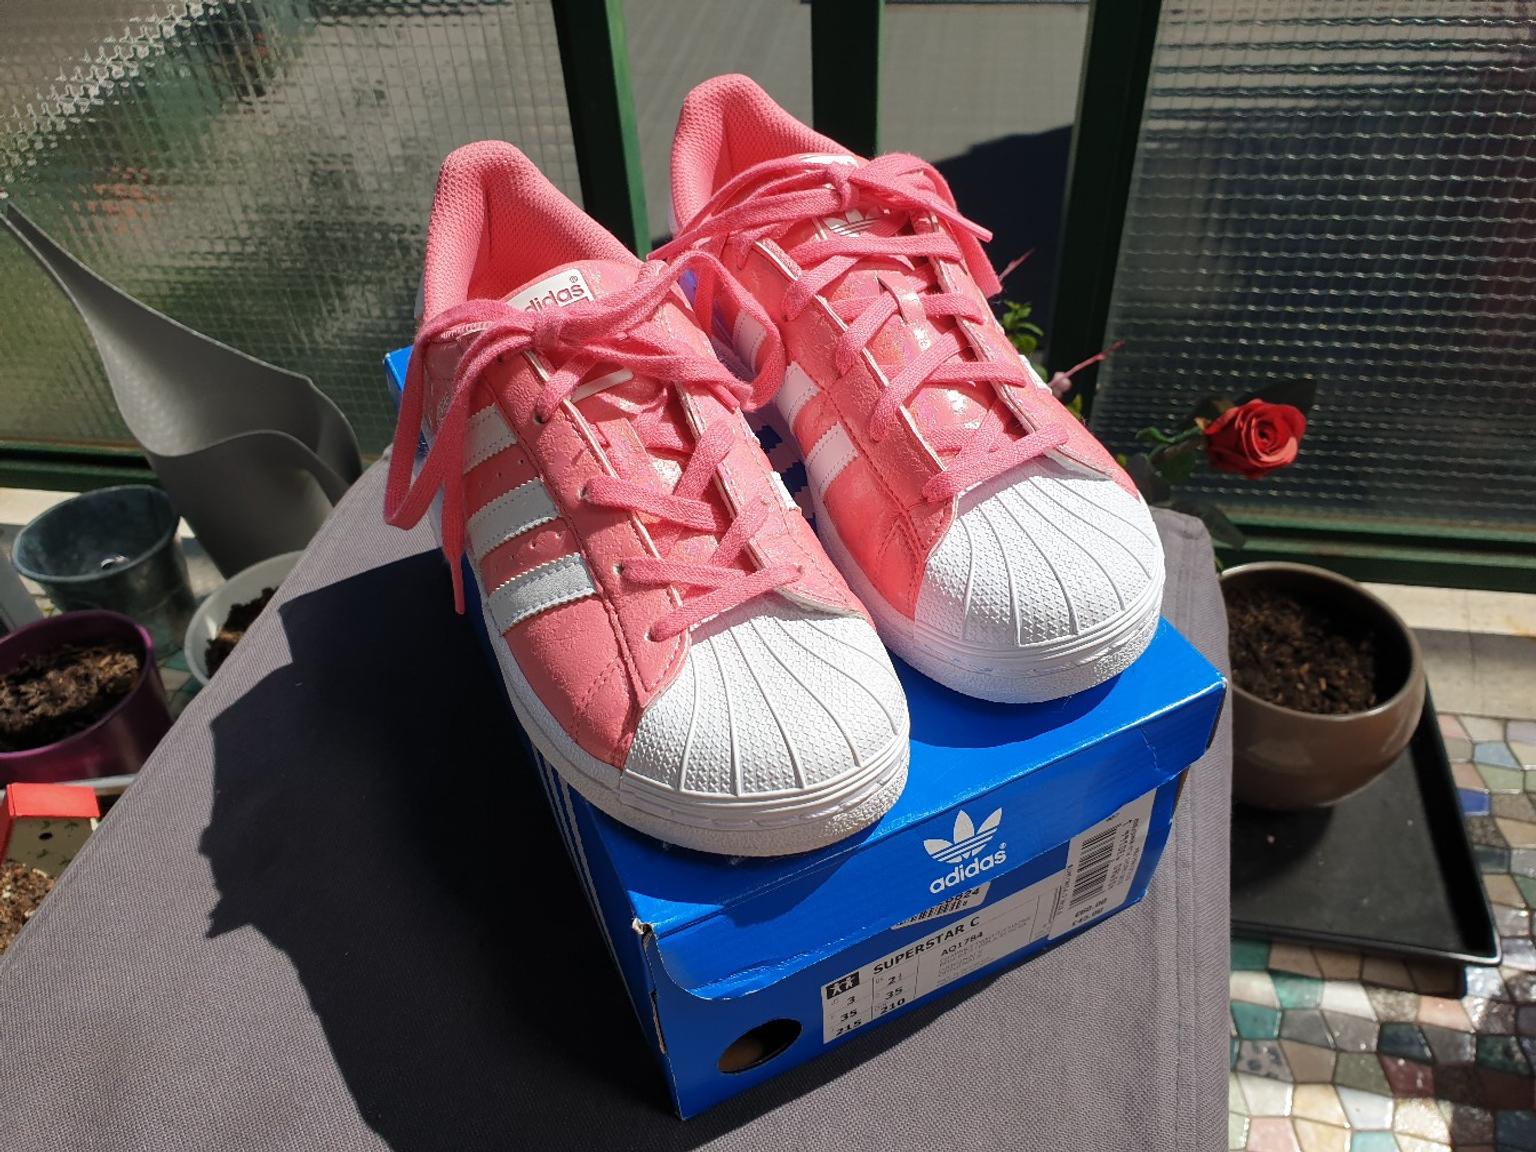 Adidas superstar nuove tg 35 rosa bianco in 20095 Cusano Milanino for  €33.00 for sale | Shpock